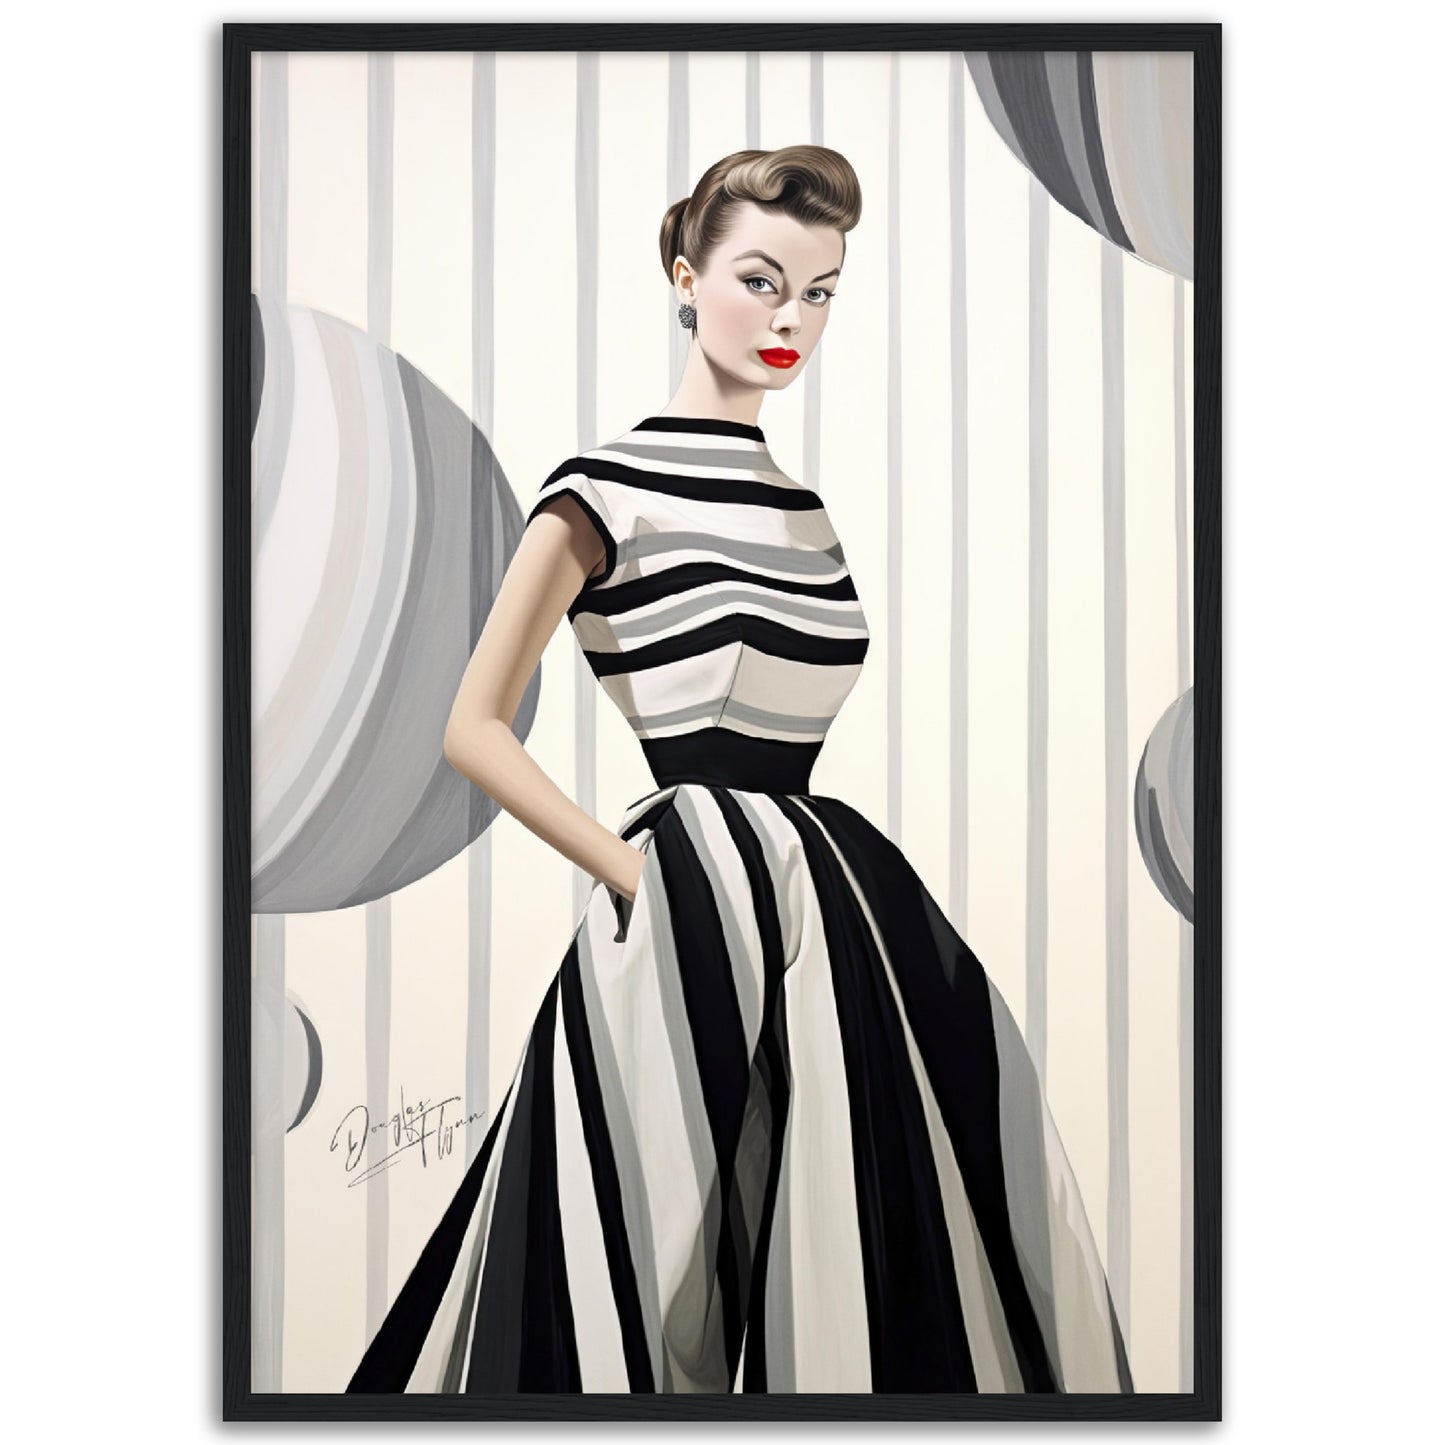 »Black and White Peplum Dress, 1950s with Bold Stripes«